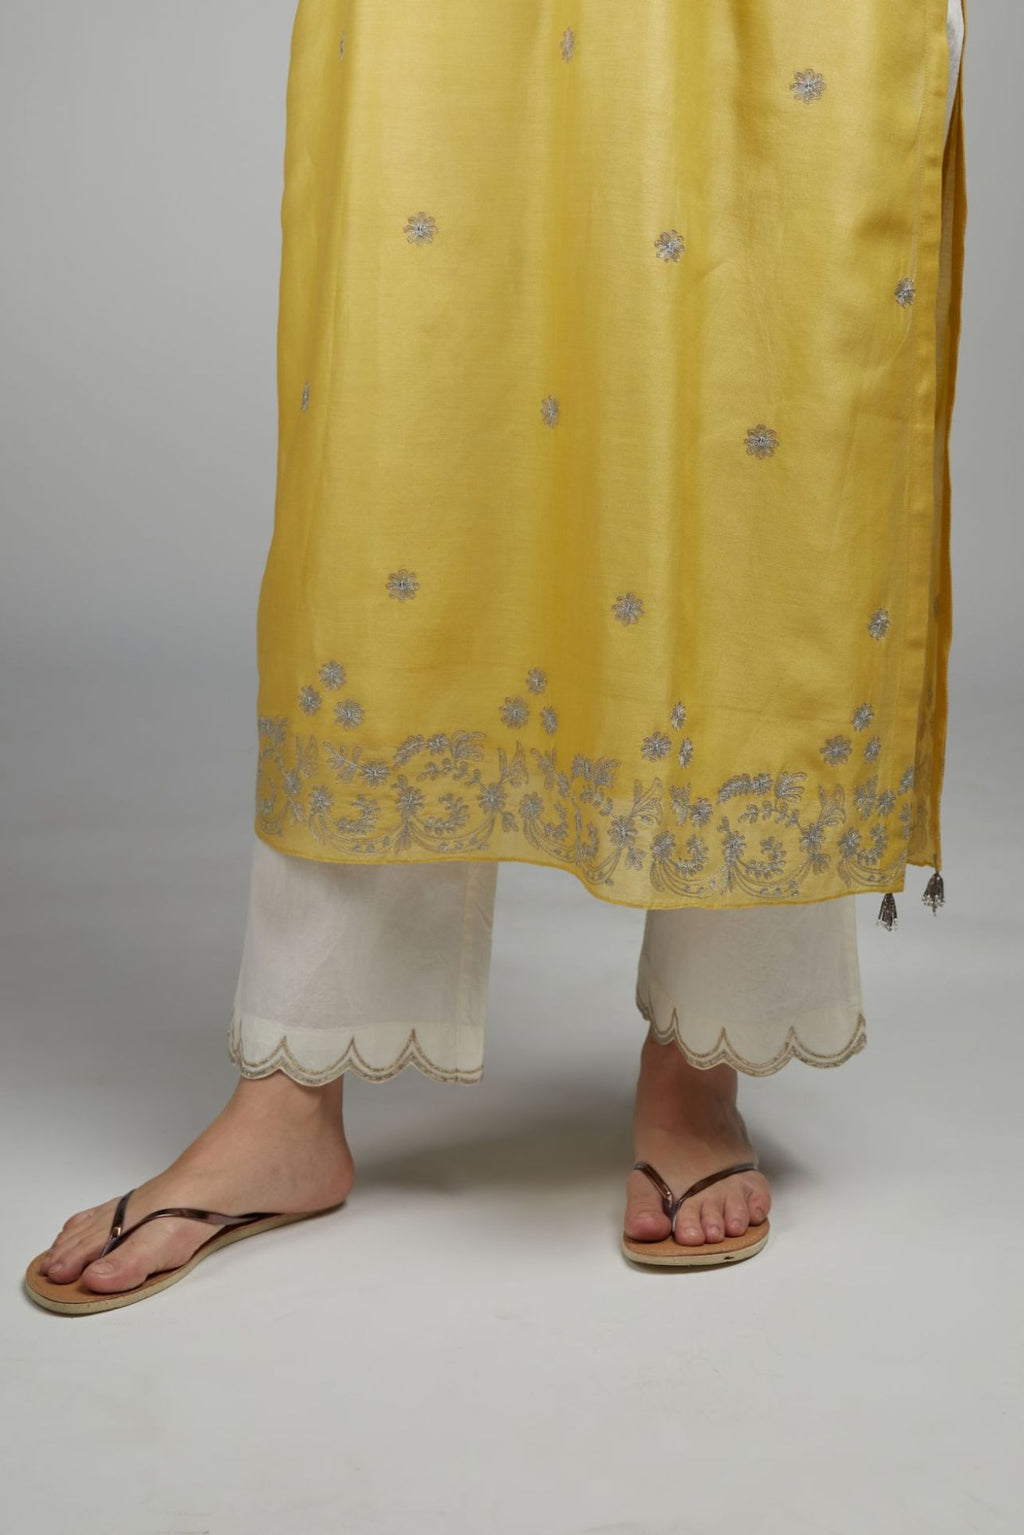 Yellow straight kurta set with silver zari embroidery and round neckline with button placket in the front